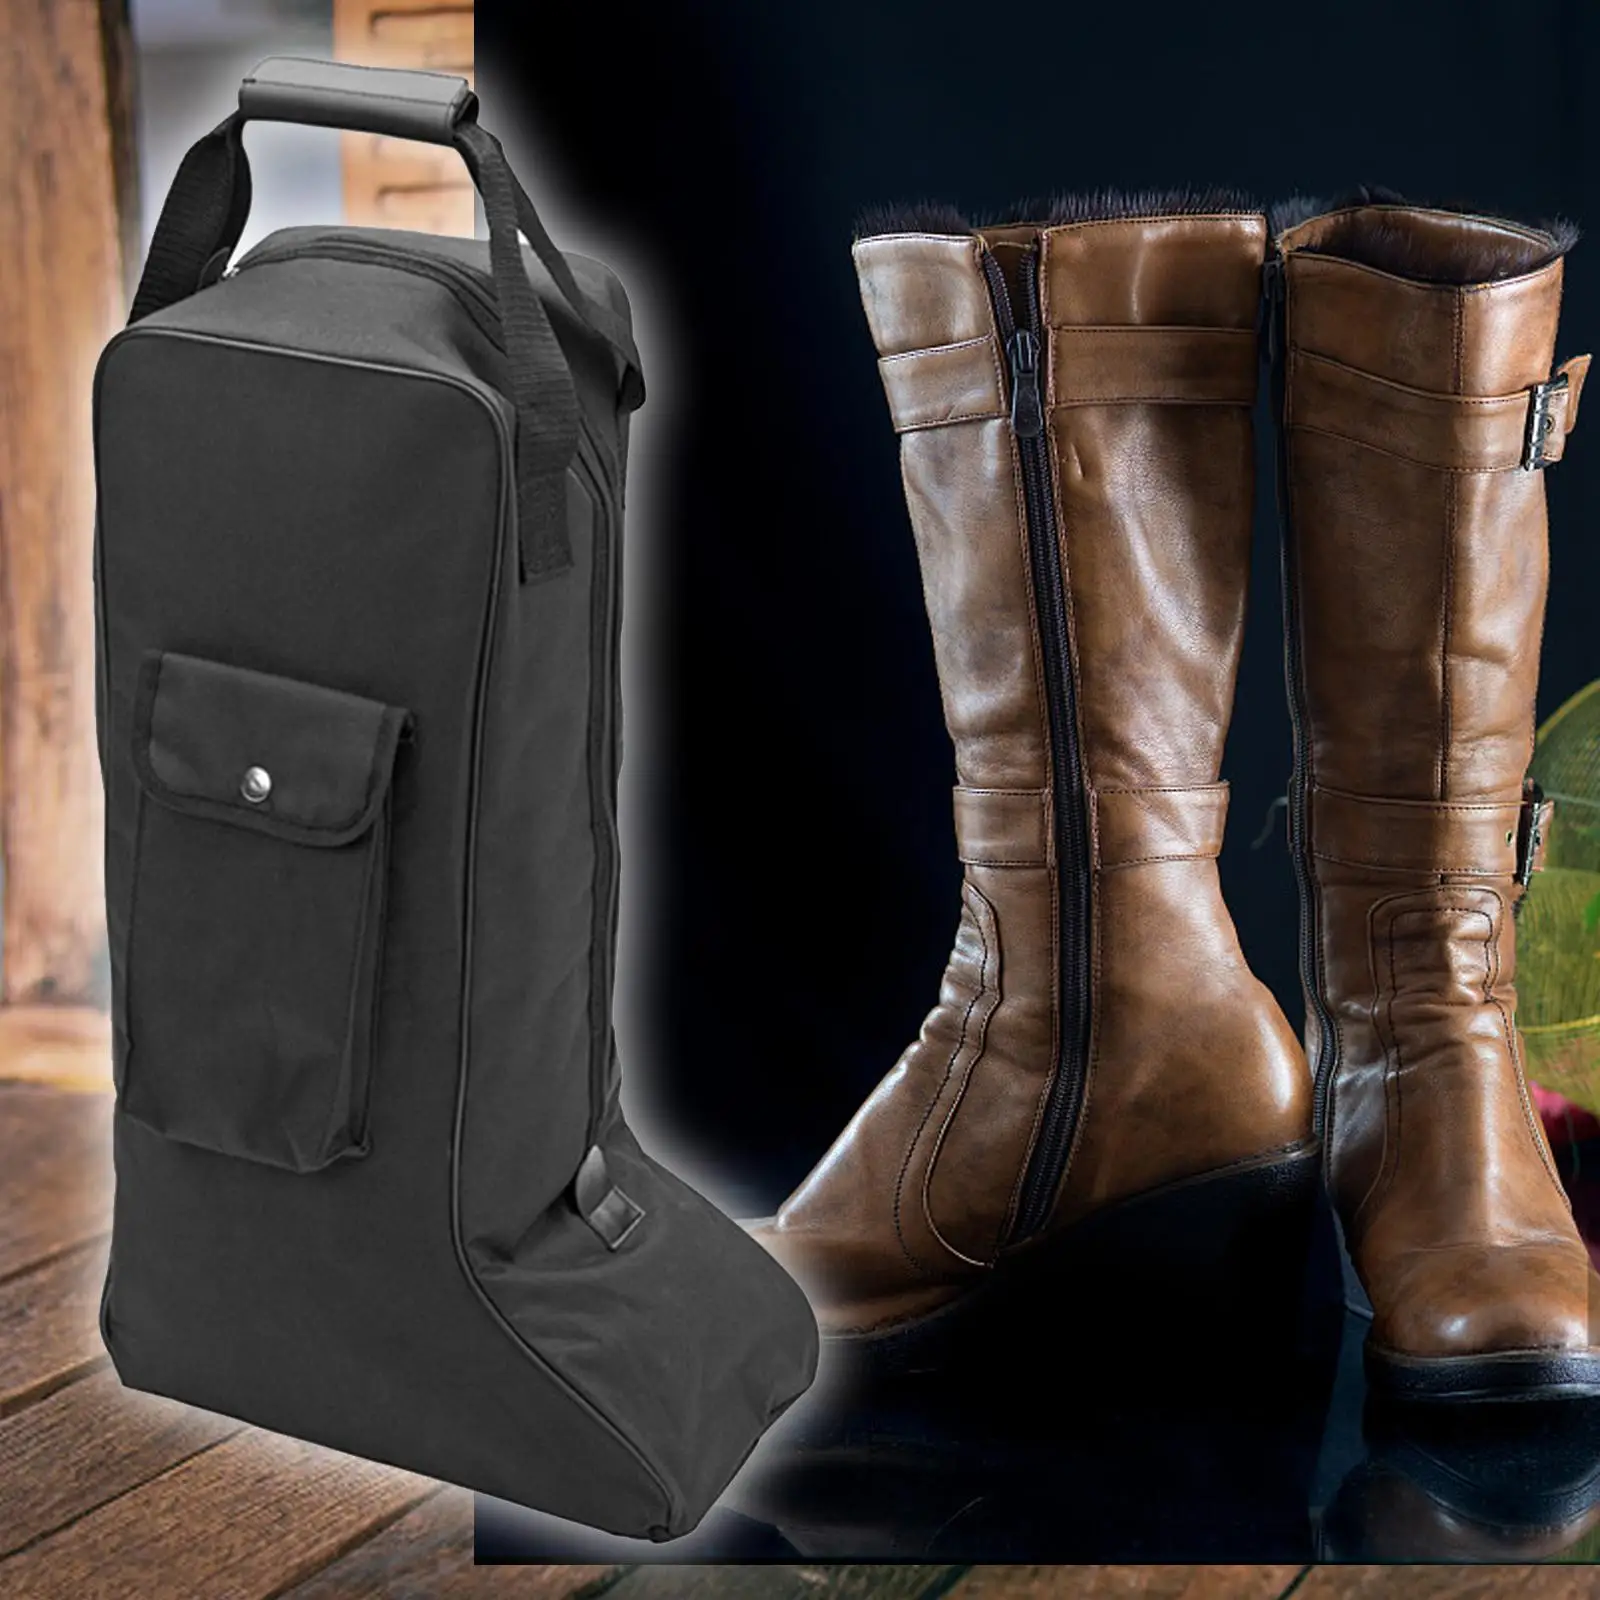 Tall Riding Boot Bag Equestrian Storage Bags for Boots for Travel Long Boots